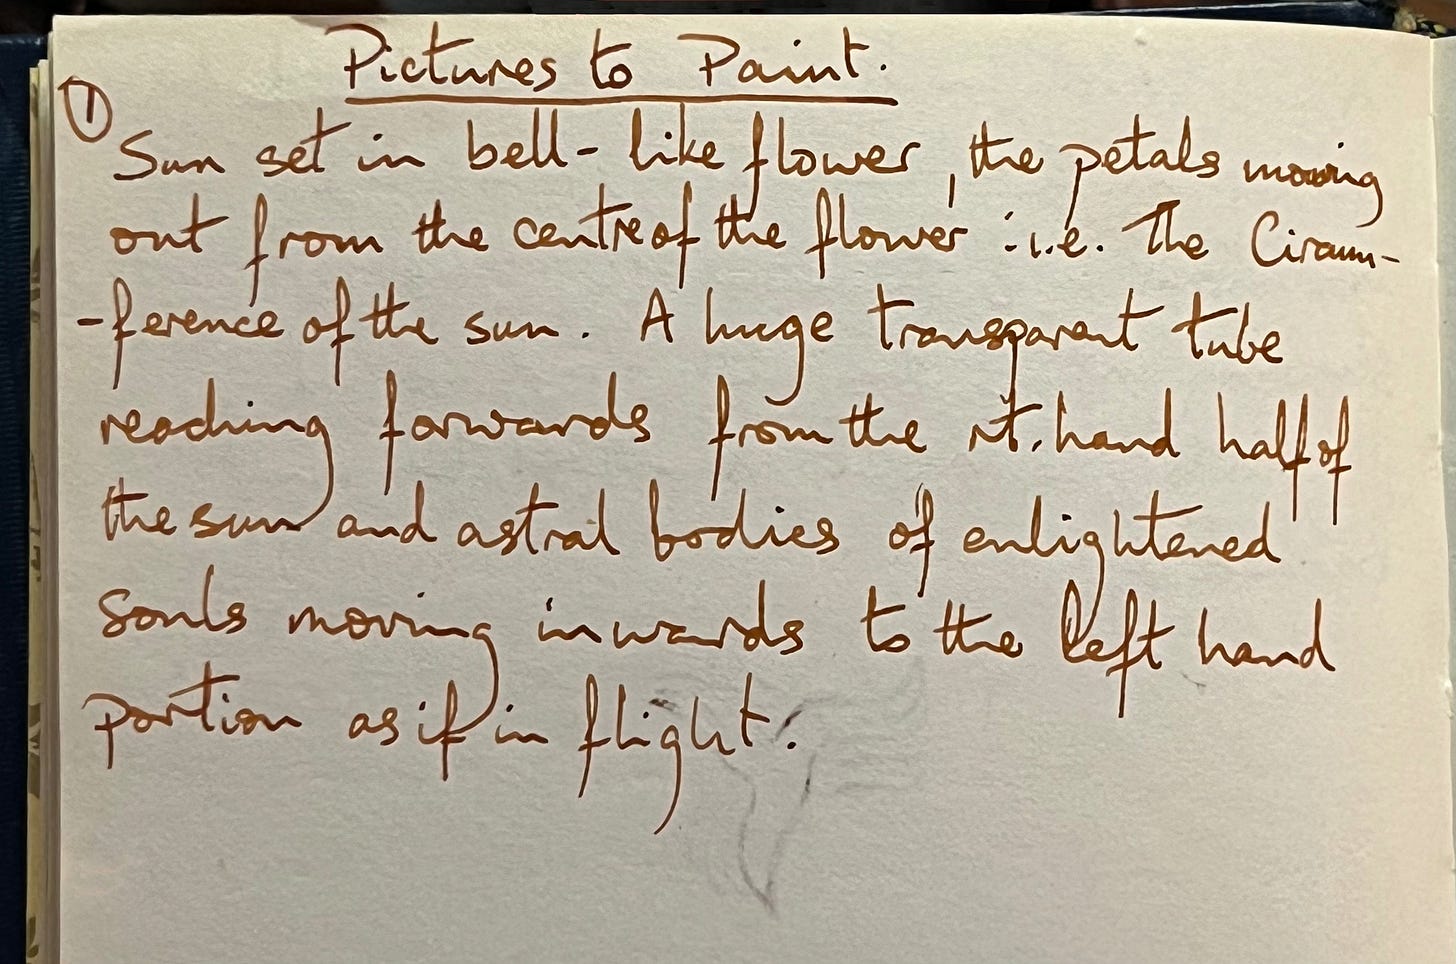 A page in an old notebook with the heading pictures to paint underlined. Then the number one, followed by the words… Sunset in a bell like flower, the petals moving out from the centre of the flower i.e the circumference of the sun. A large, transparent tube, reaching forwards from the right hand, half of the Sun and astral bodies of enlightened souls, moving inwards to the left-hand portion as if in flight.